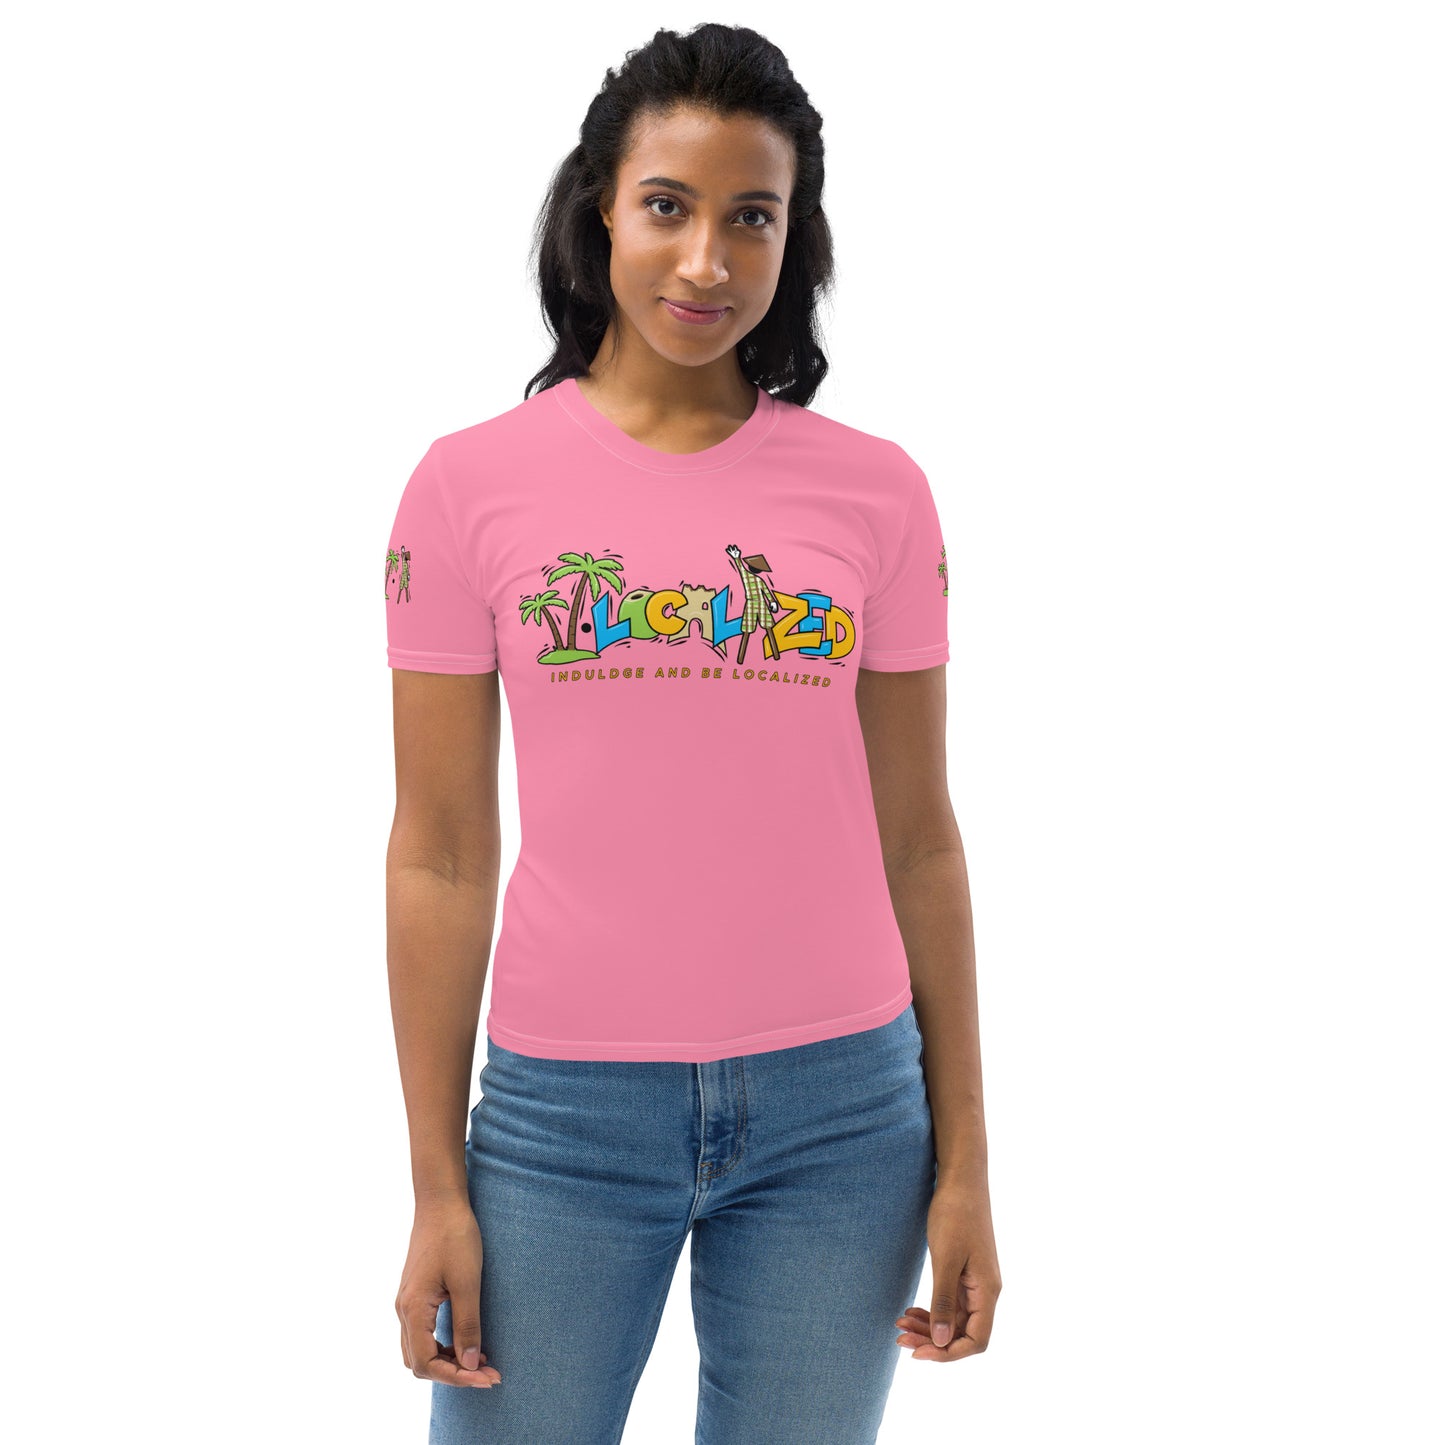 Pink V.Localized (Regular) Women’s Dry-Fit T-Shirt